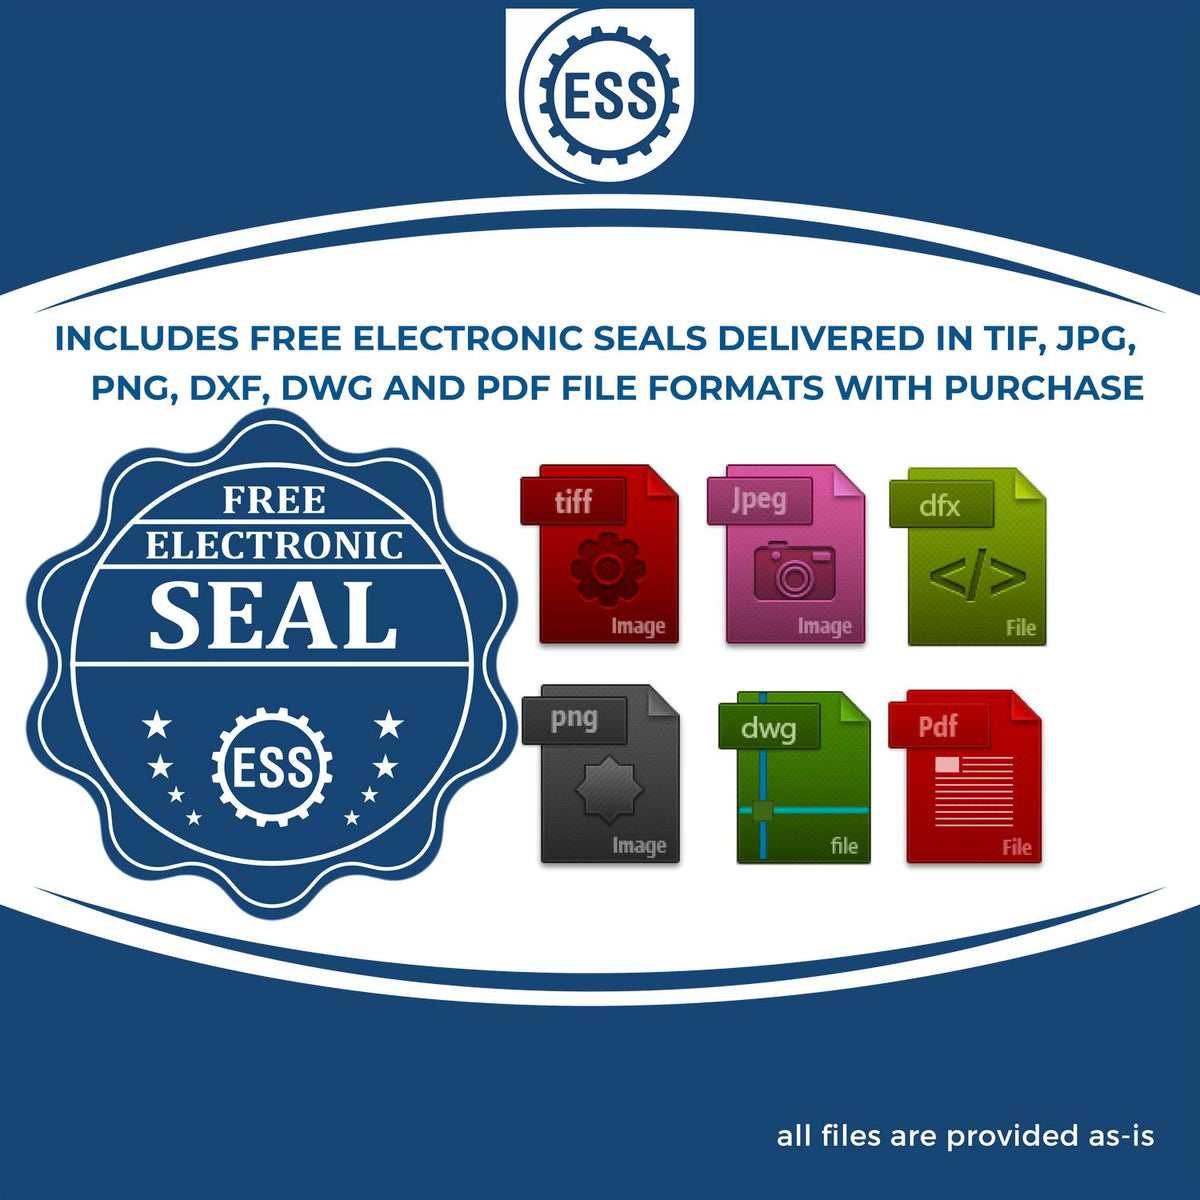 An infographic for the free electronic seal for the State of Michigan Long Reach Architectural Embossing Seal illustrating the different file type icons such as DXF, DWG, TIF, JPG and PNG.